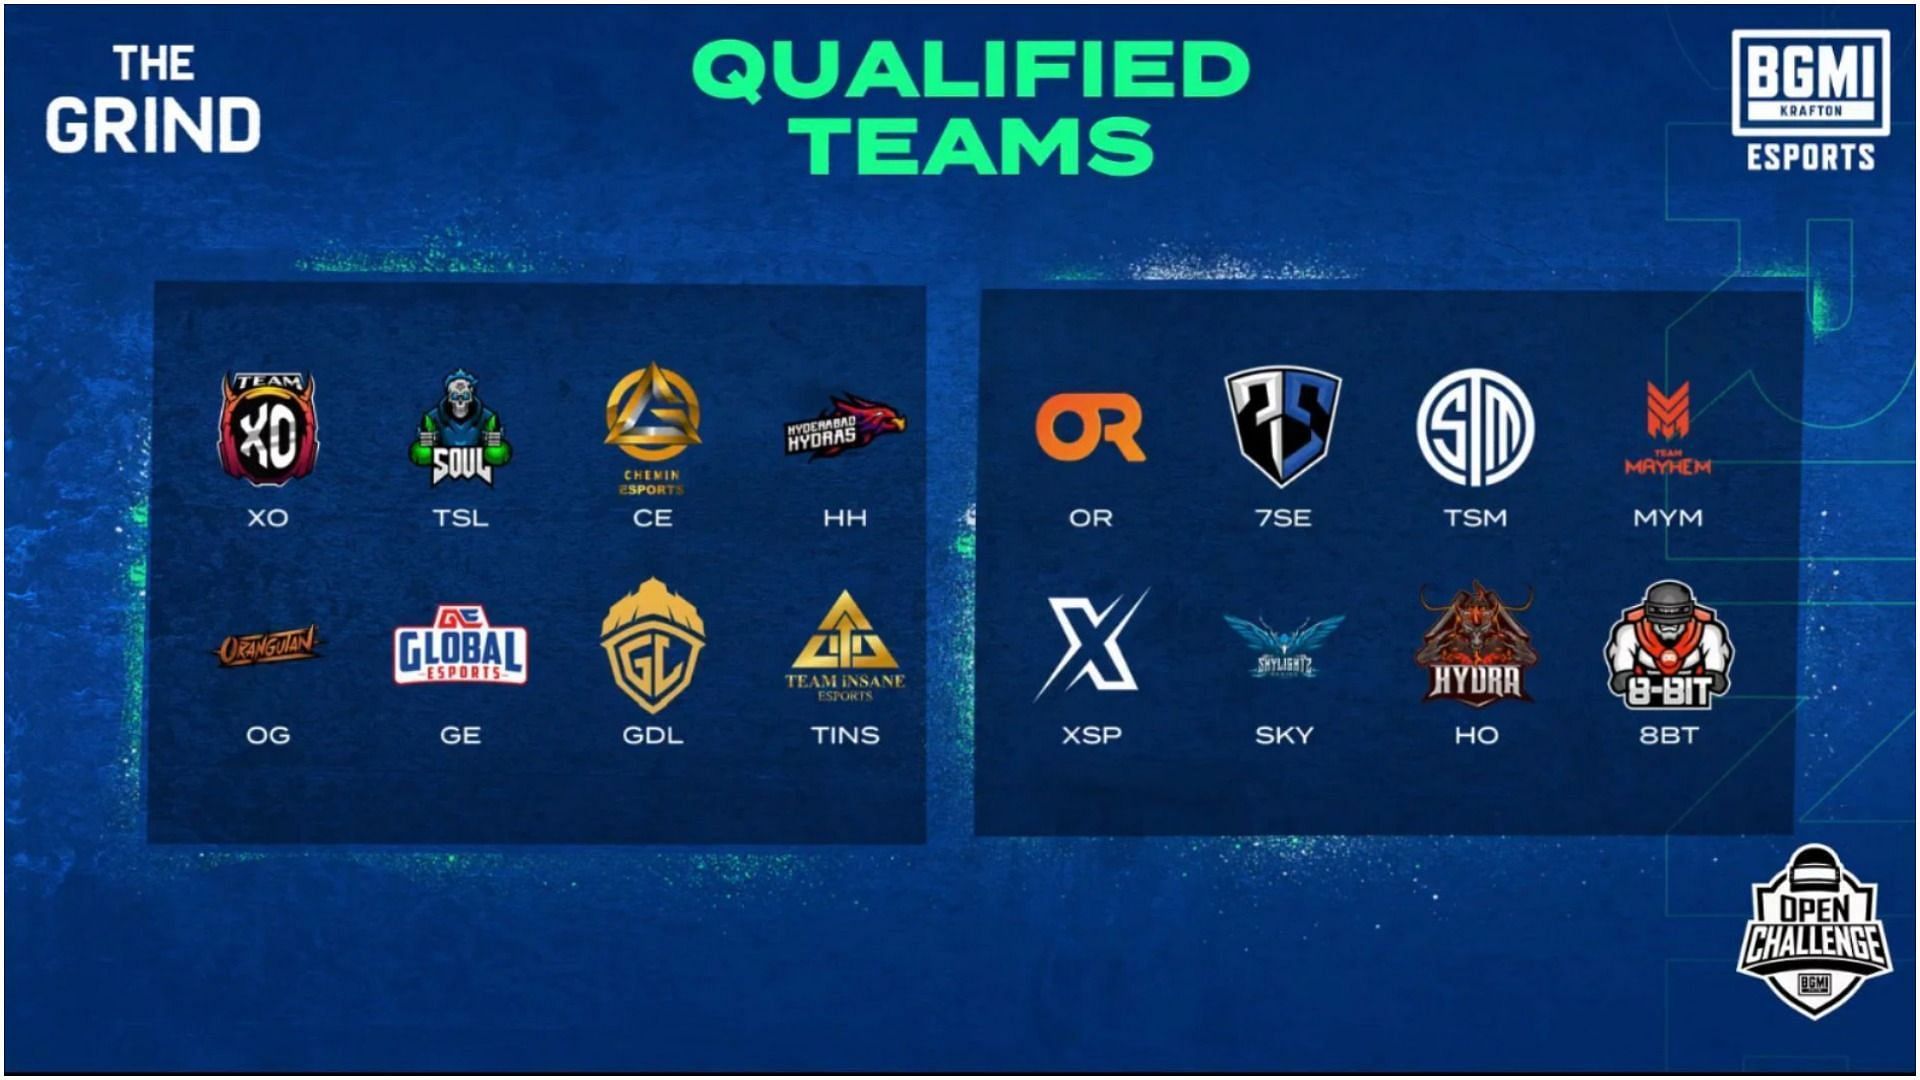 Going through the list of qualified teams for BMOC The Grind League Stages (Image via YouTube/Battlegrounds Mobile India)